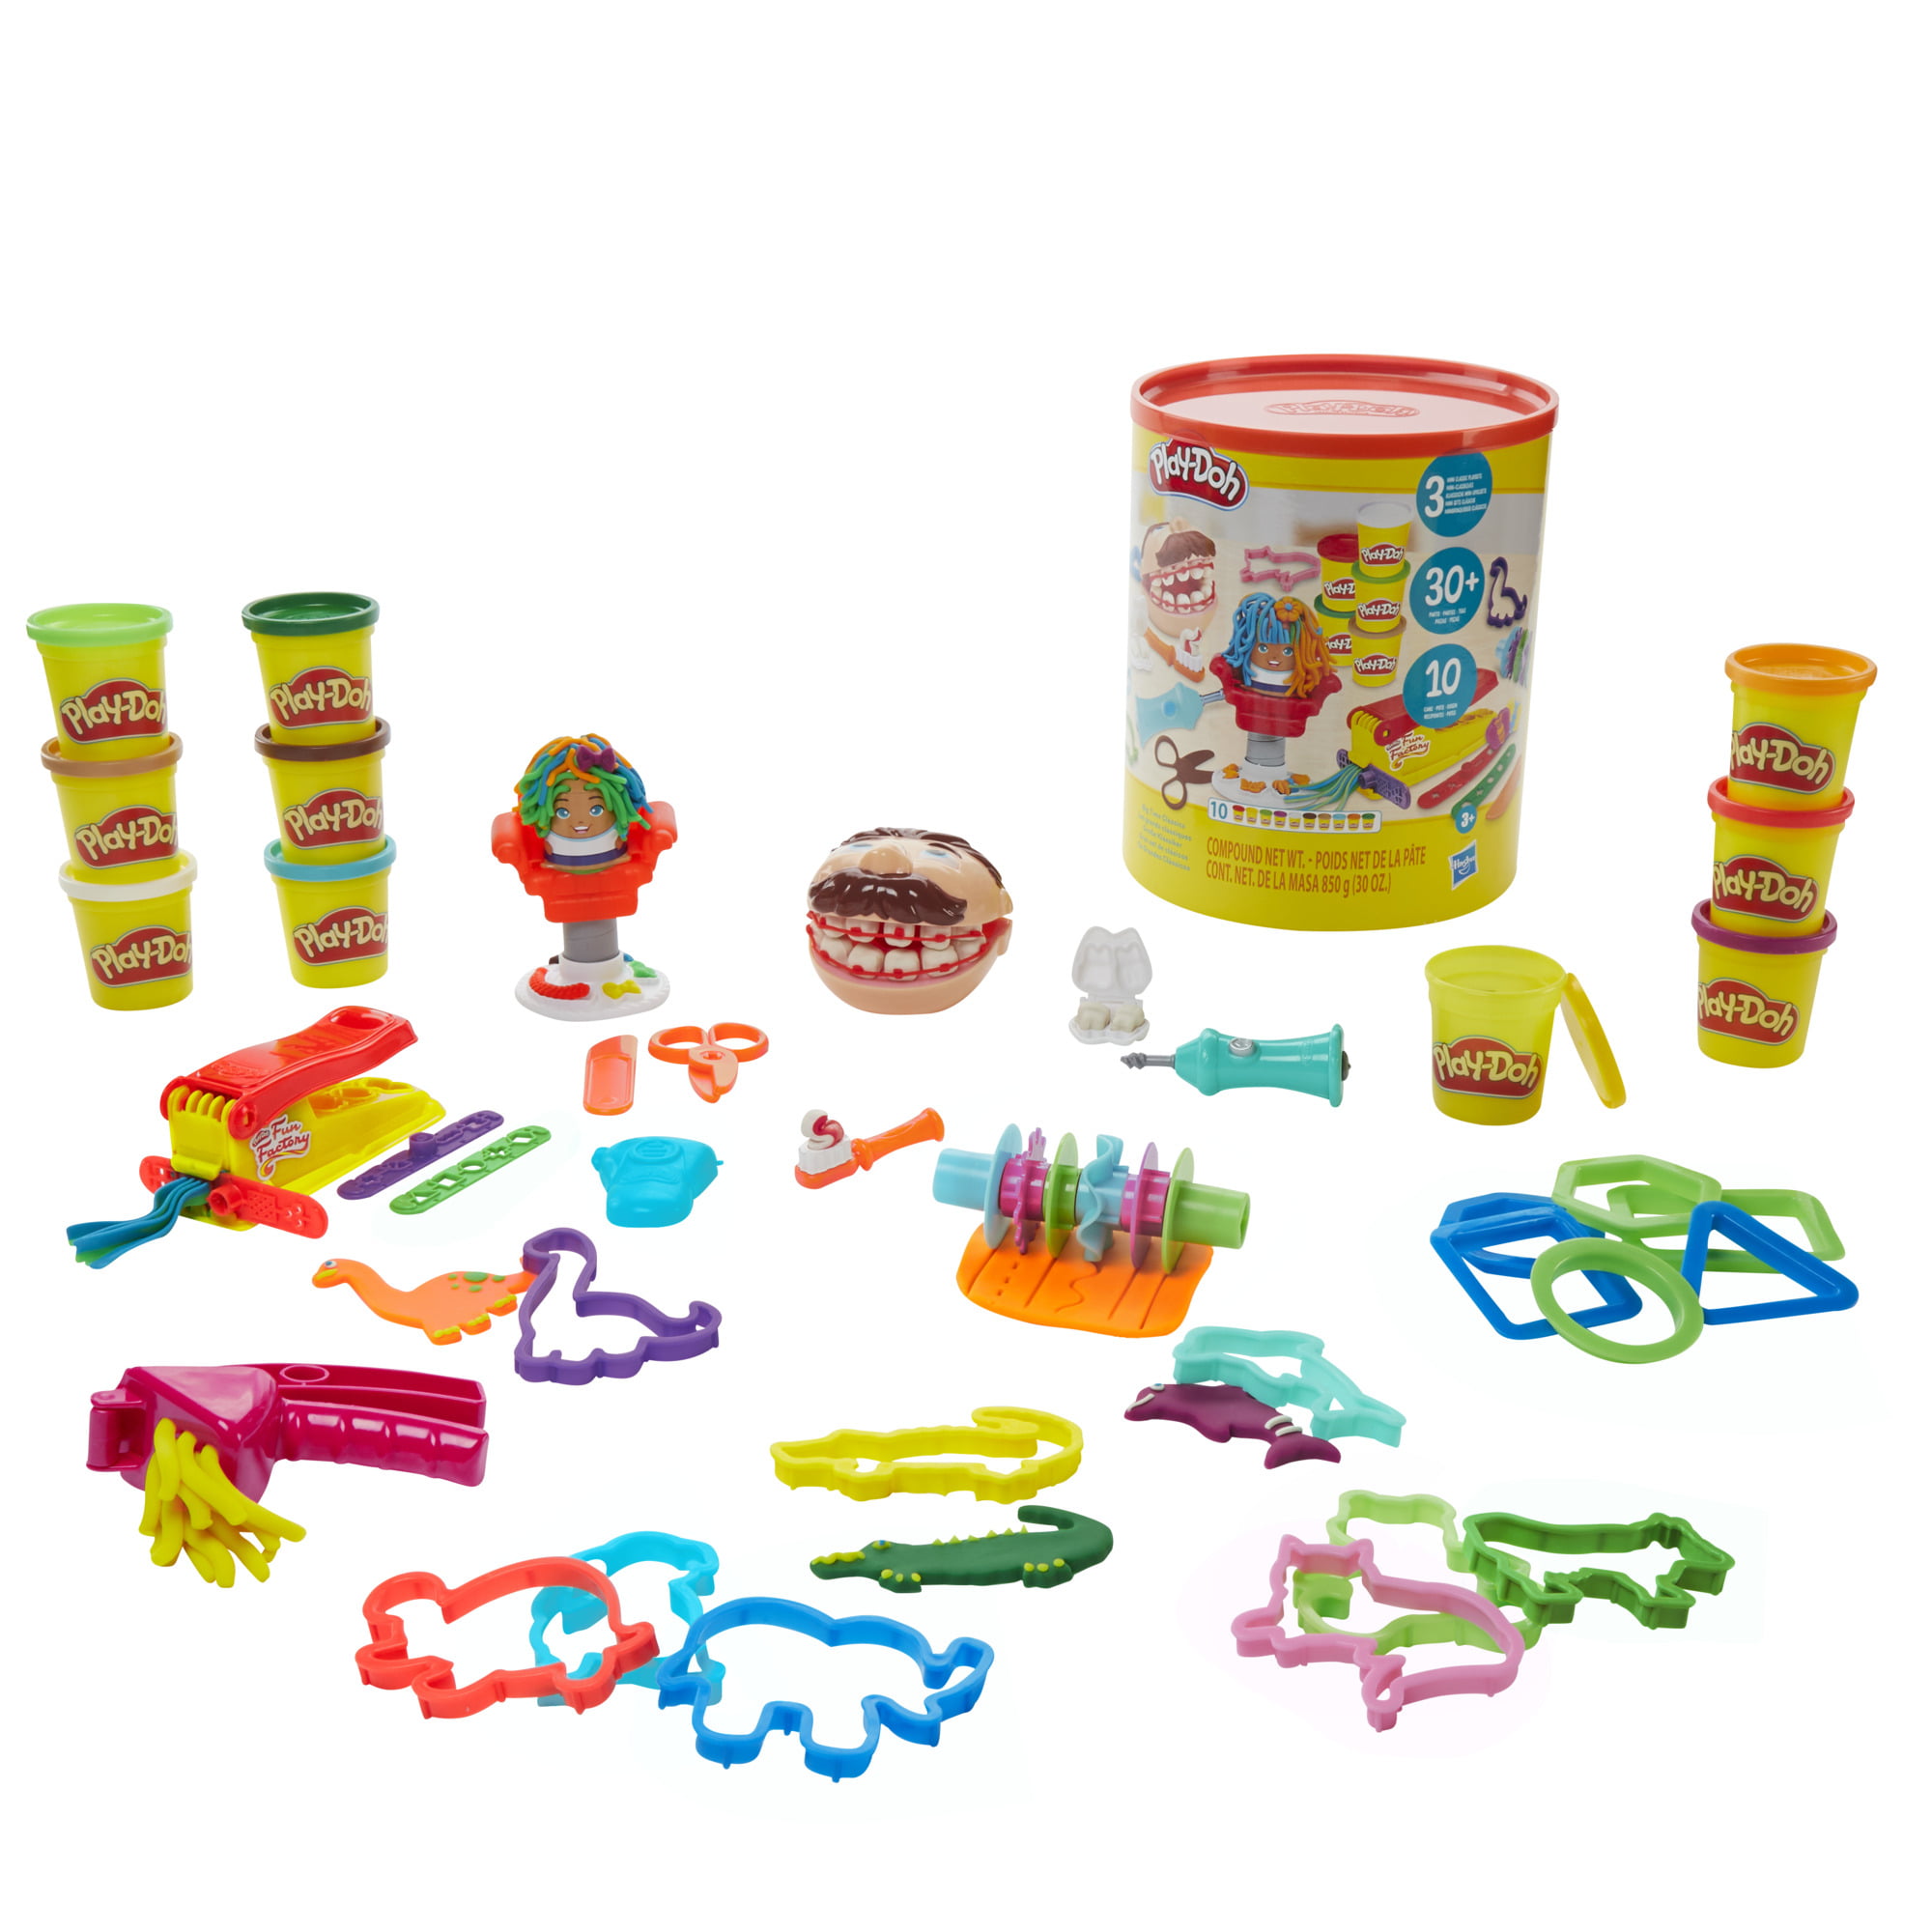 Play-Doh Big Time Classics Canister Bundle of 3 Playsets, 30 Ounces Modeling Compound  $15, FS with W+ or $35+